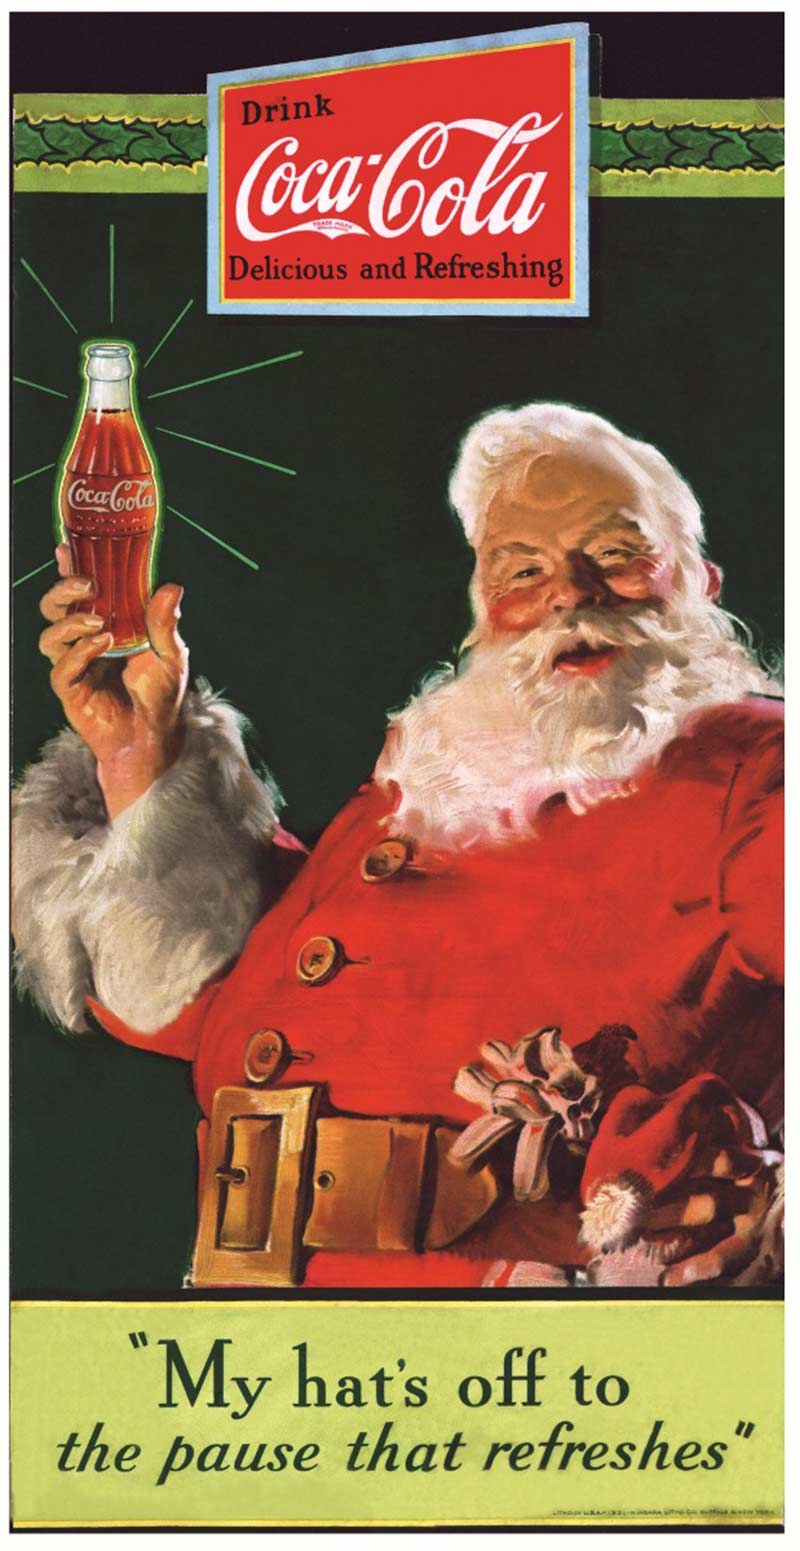 Artist-Haddon-Sundblom-creates-his-first-illustration-showing-Santa-Claus-pausing-for-a-Coke-in-1931